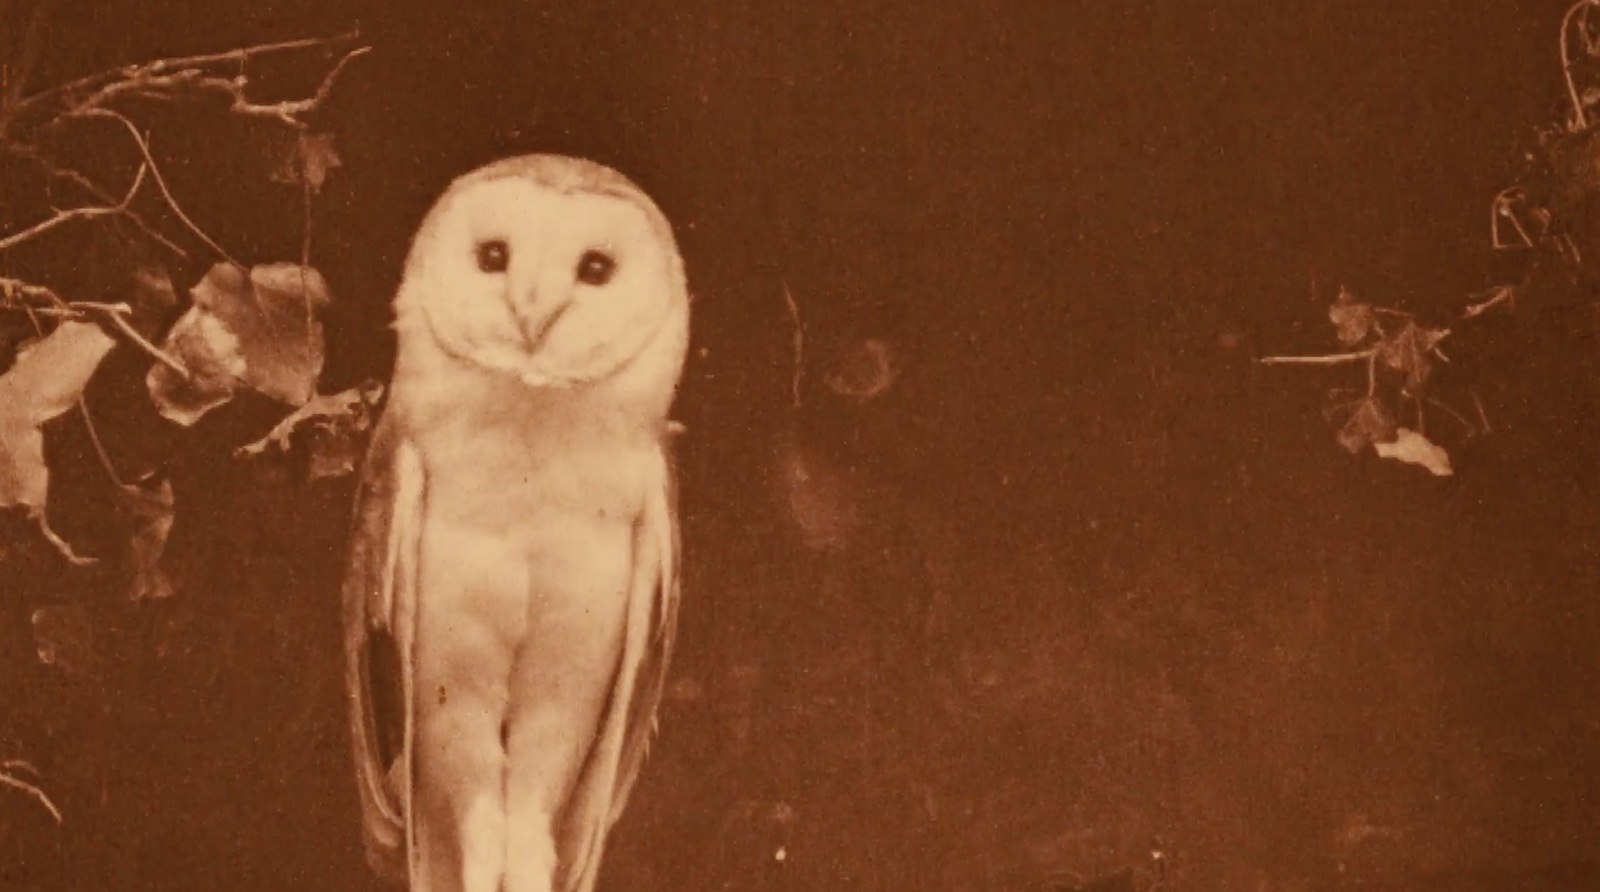 A faded photograph of an owl looking at camera, surrounded by leaves